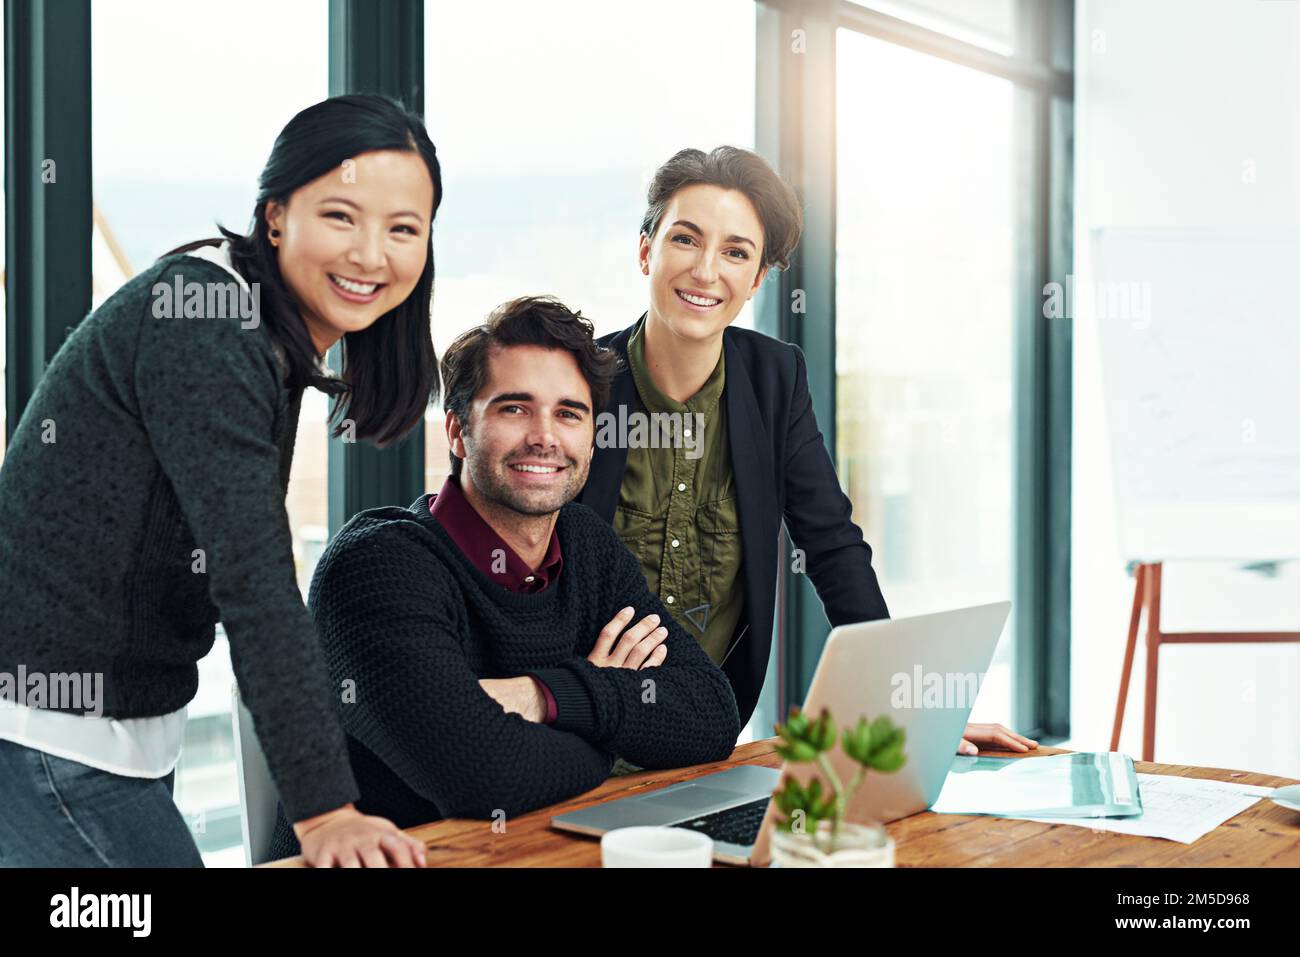 Together were a force to be reckoned with. Cropped portrait of a team of businesspeople discussing work at a desk in their office. Stock Photo